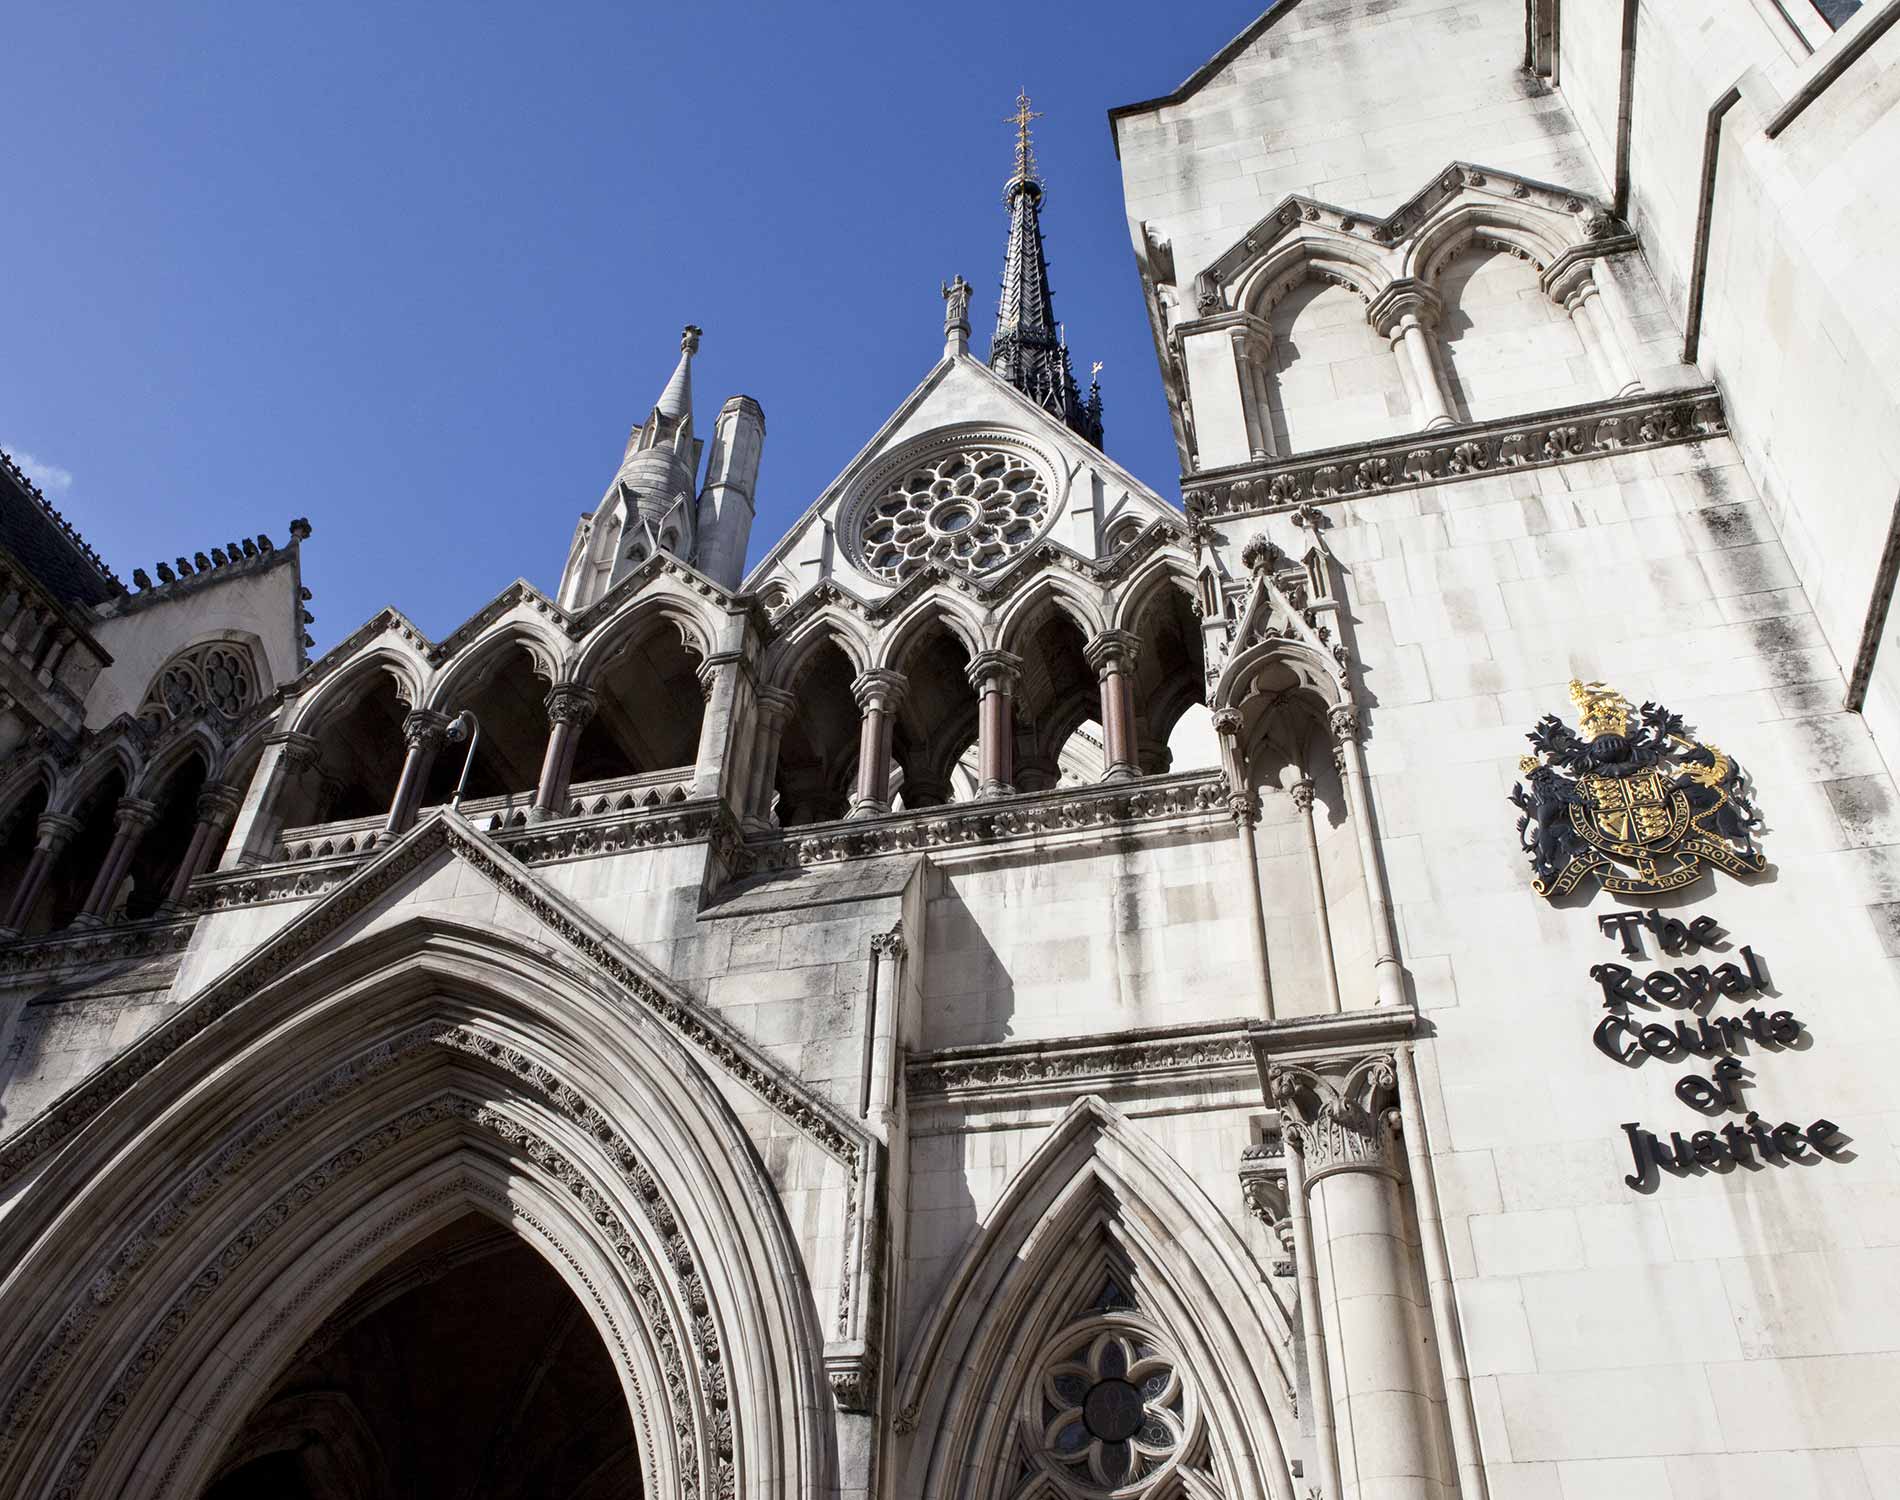 The Royal Courts of Justice in London